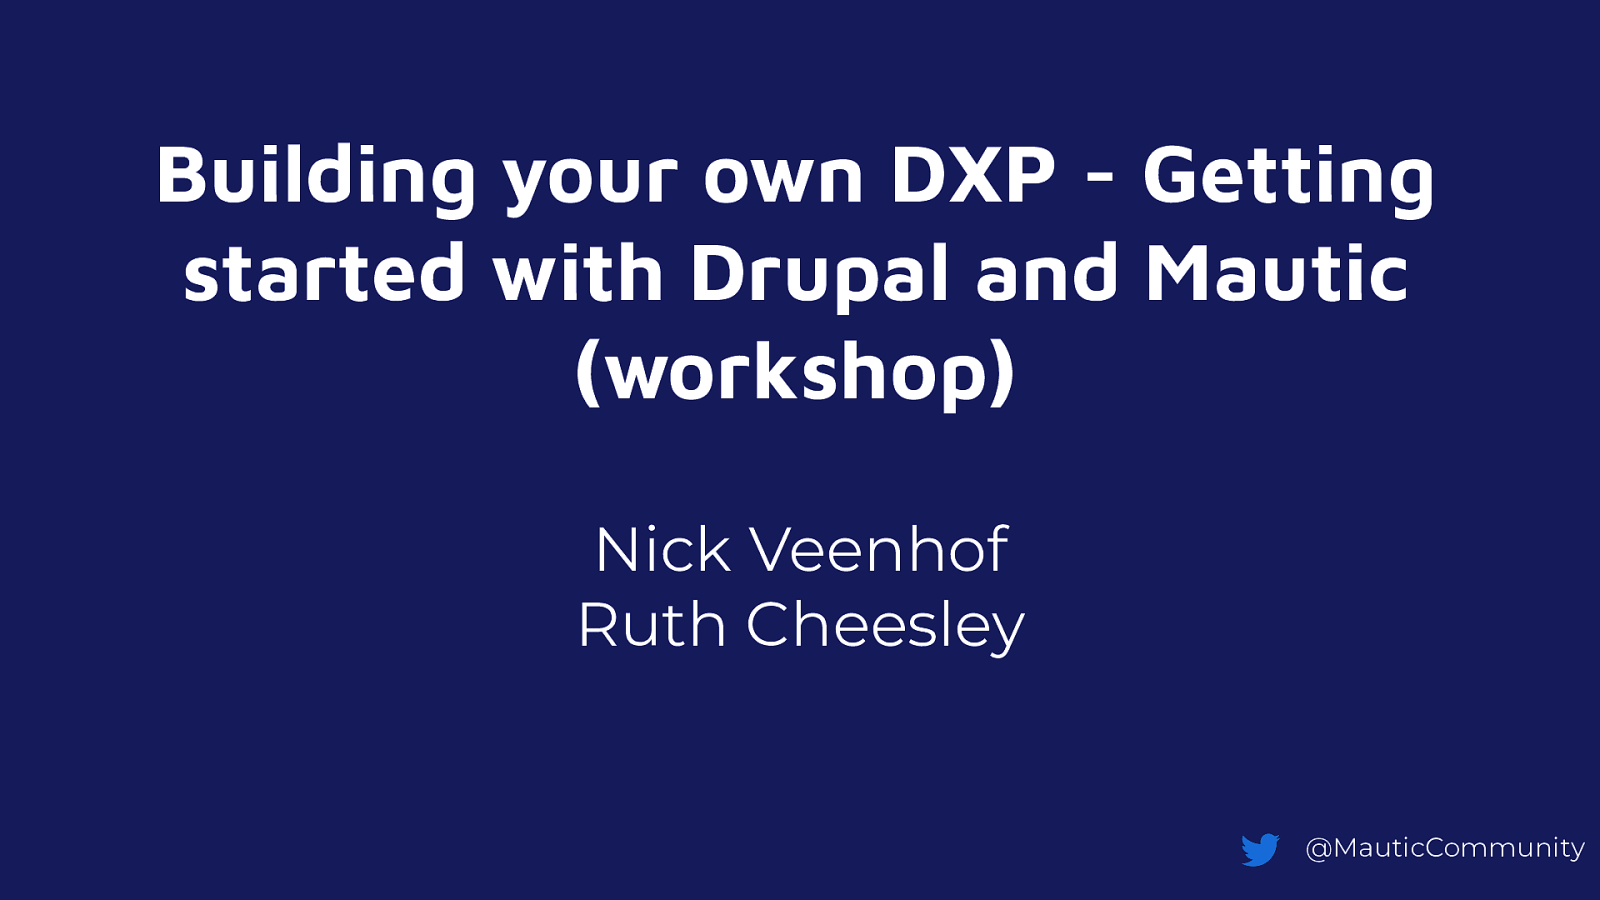 Building your own DXP - Getting started with Drupal and Mautic